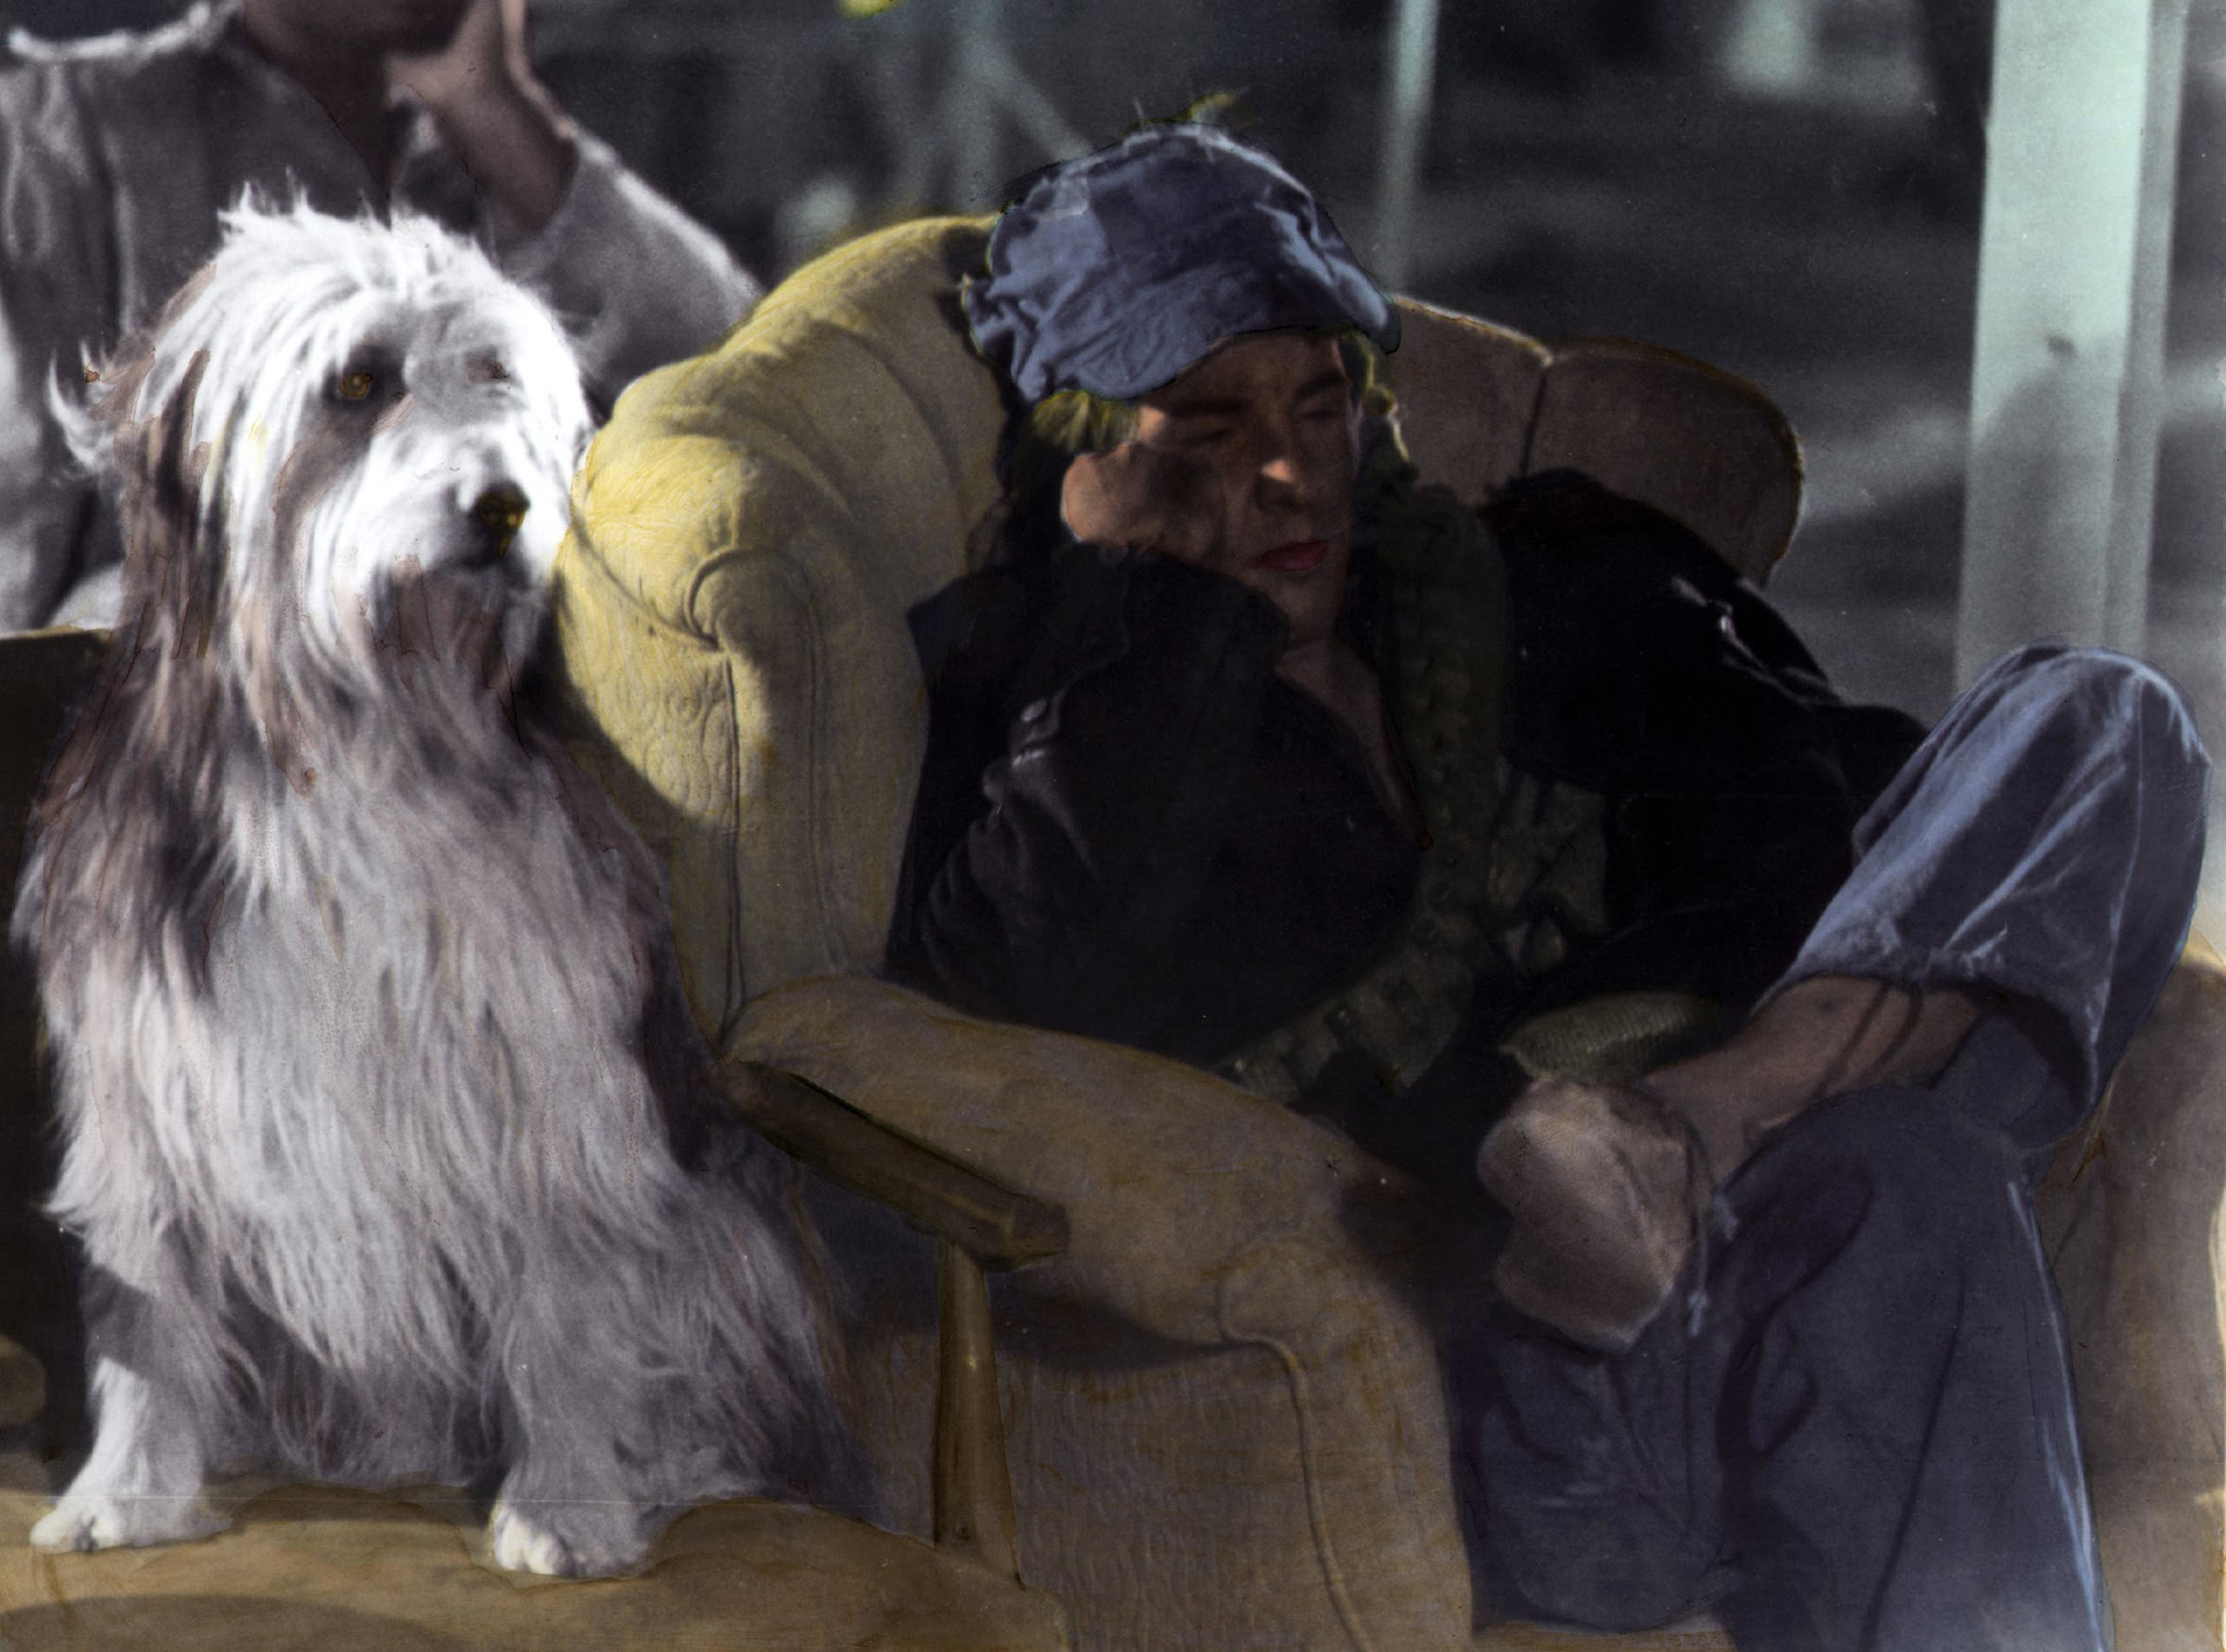 A young man in a filthy chair stares in the distance next to his shaggy dog